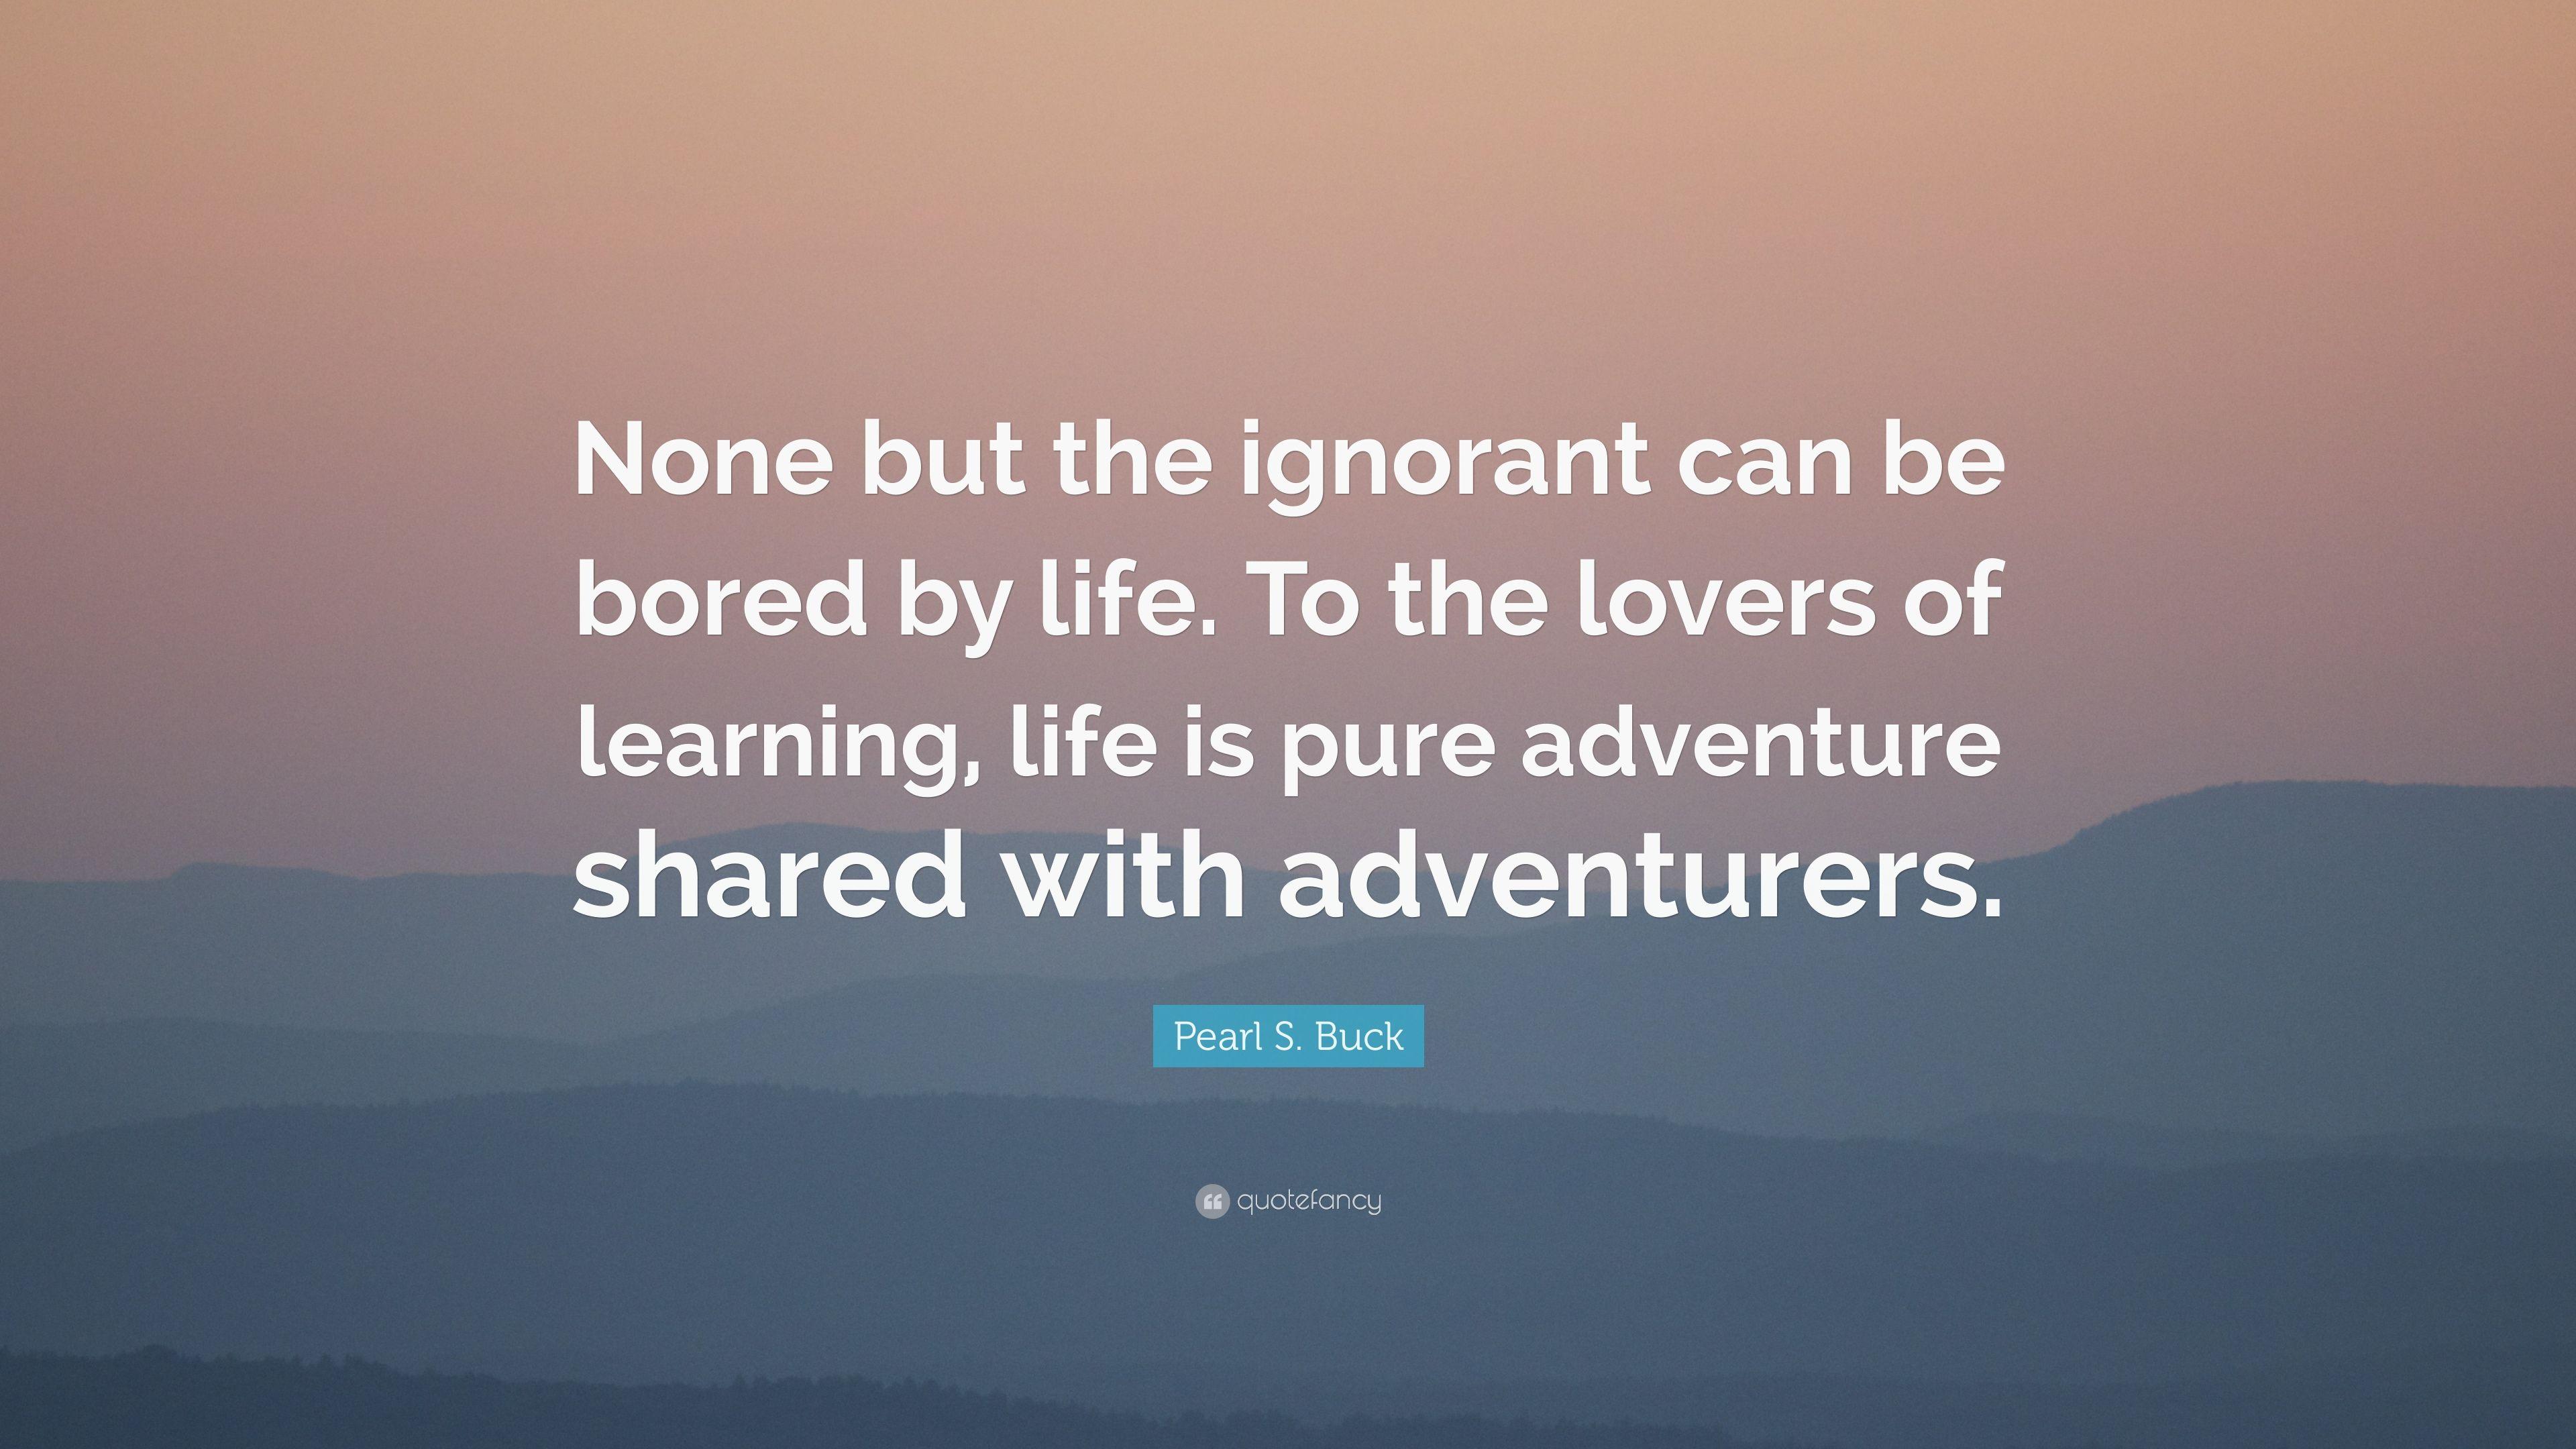 Pearl S. Buck Quote: “None but the ignorant can be bored